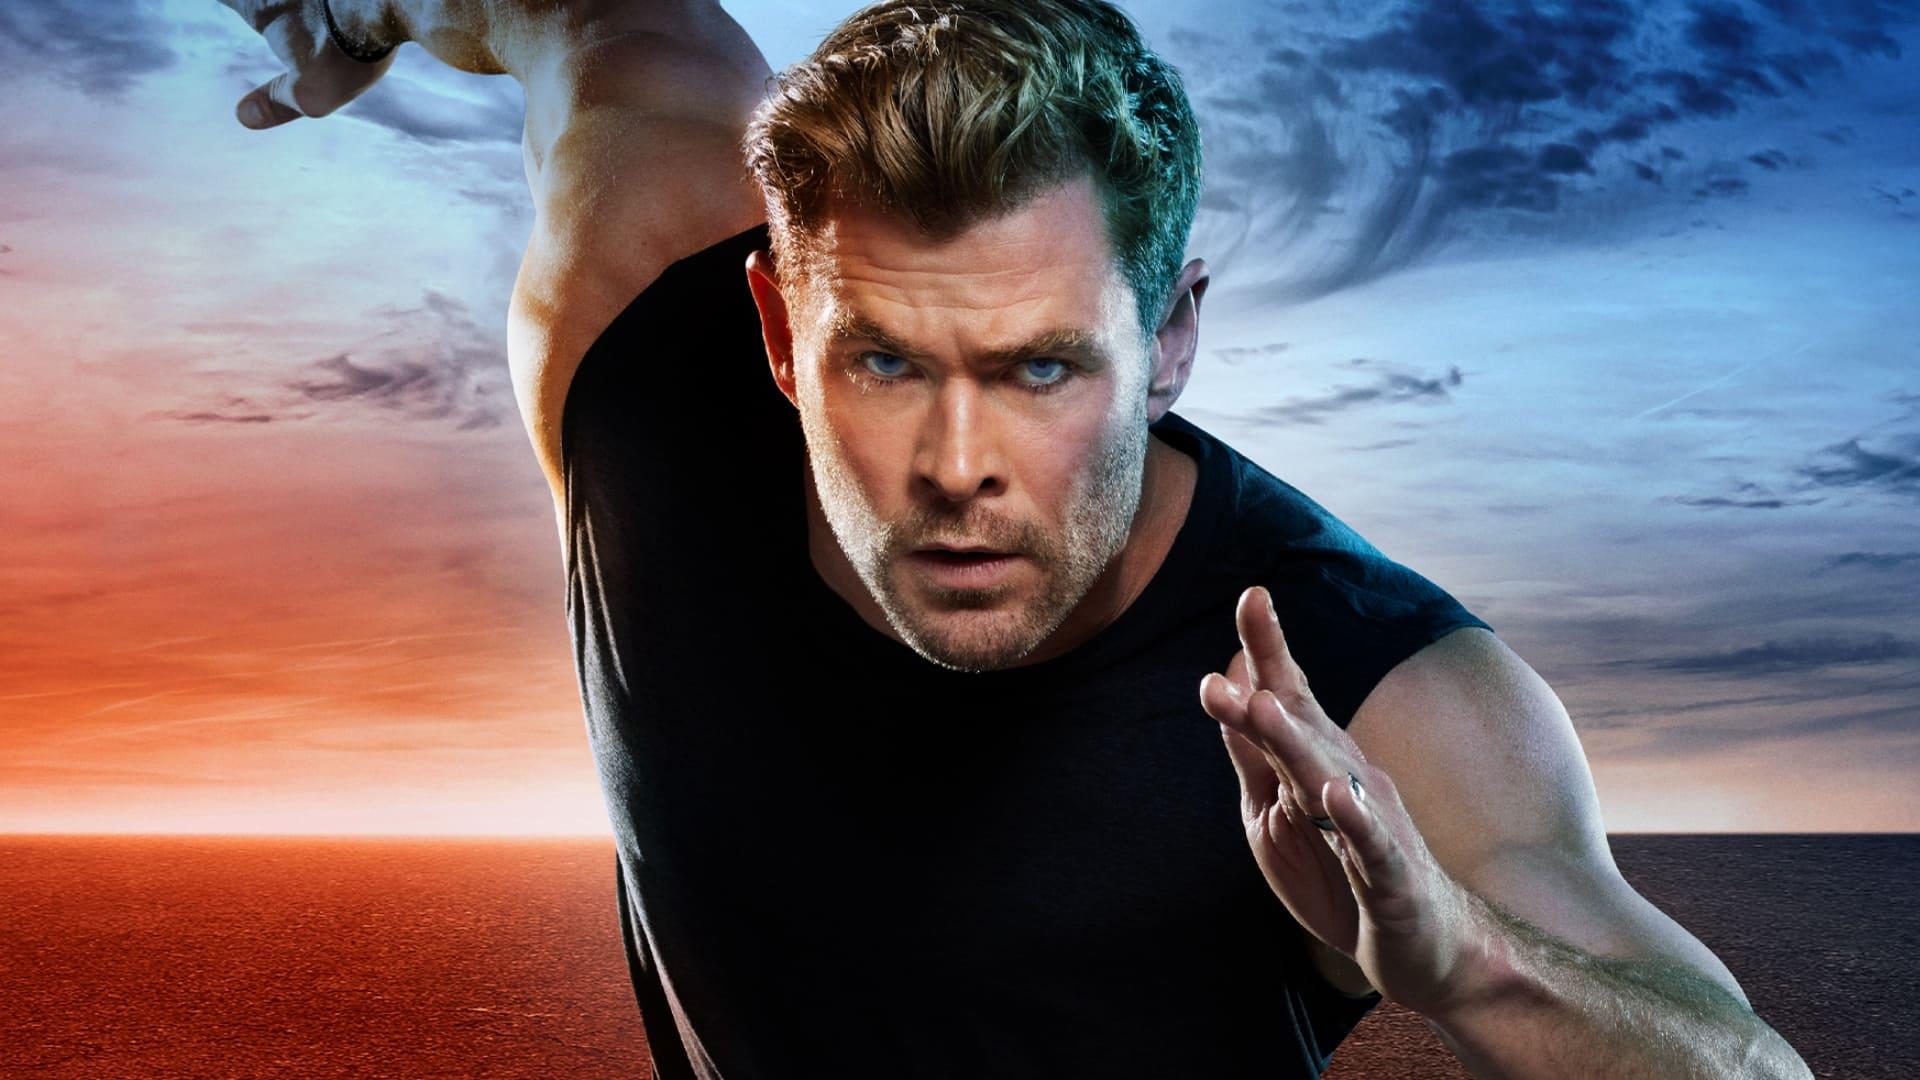 Limitless with Chris Hemsworth backdrop